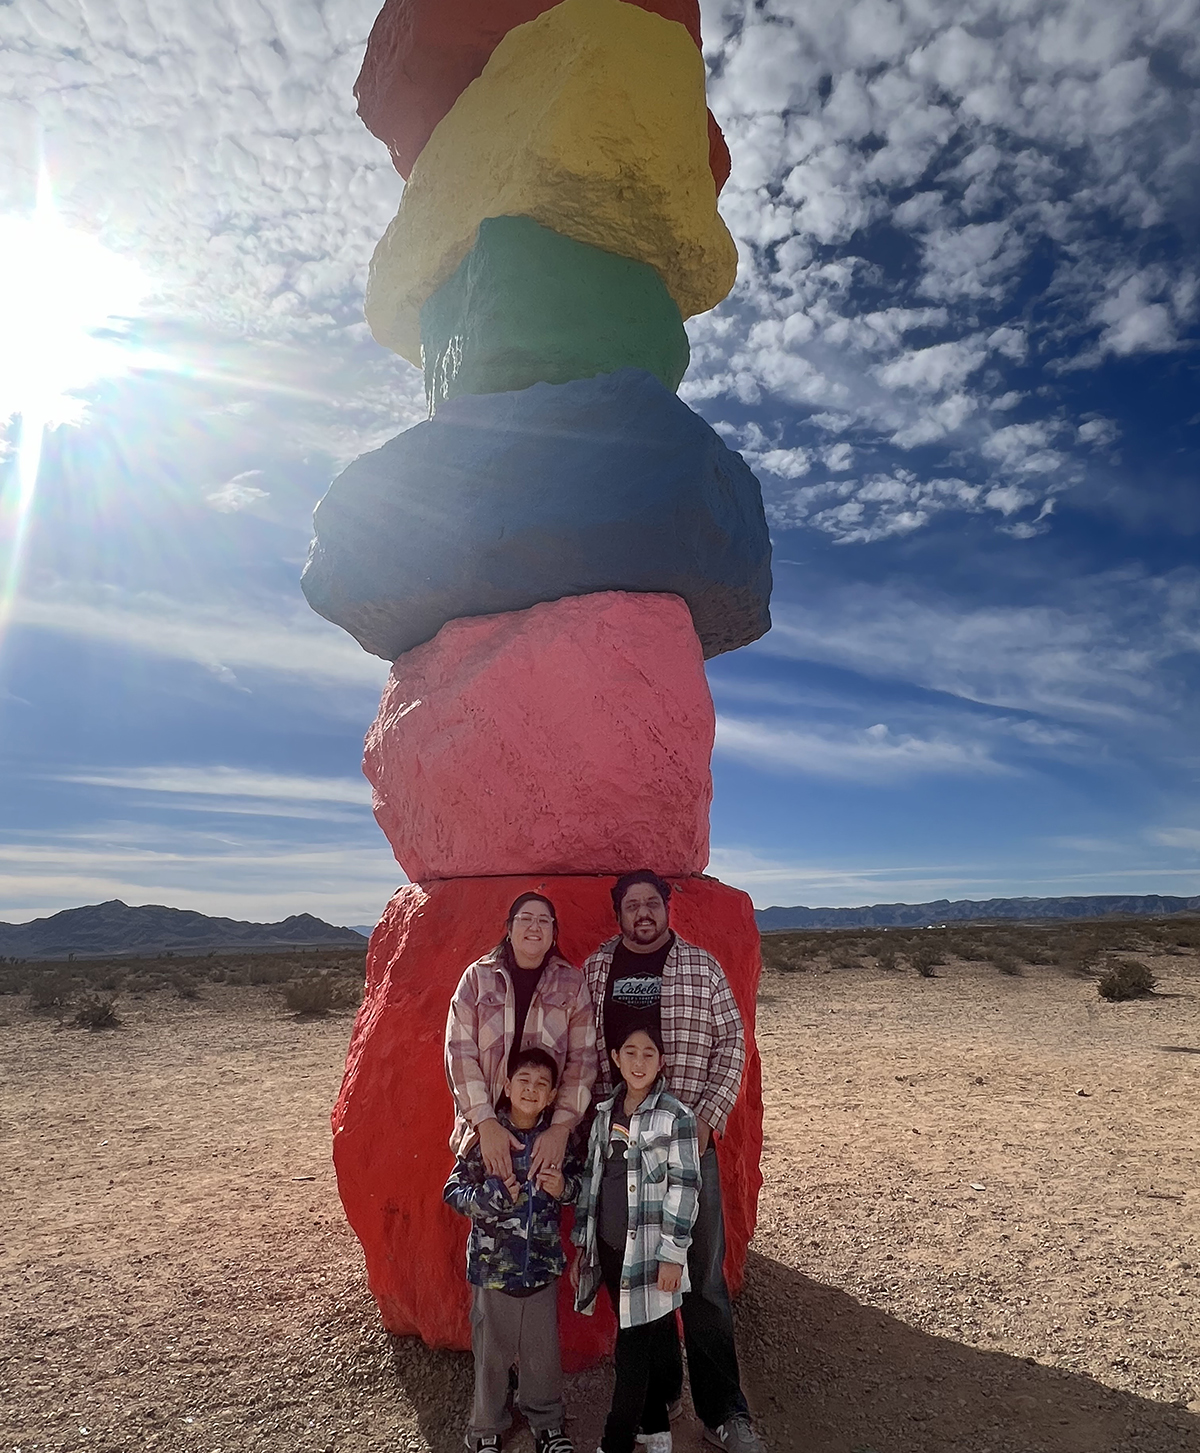 Michelle and her family standing in front of a colorful sculpture in t?2024-07-02